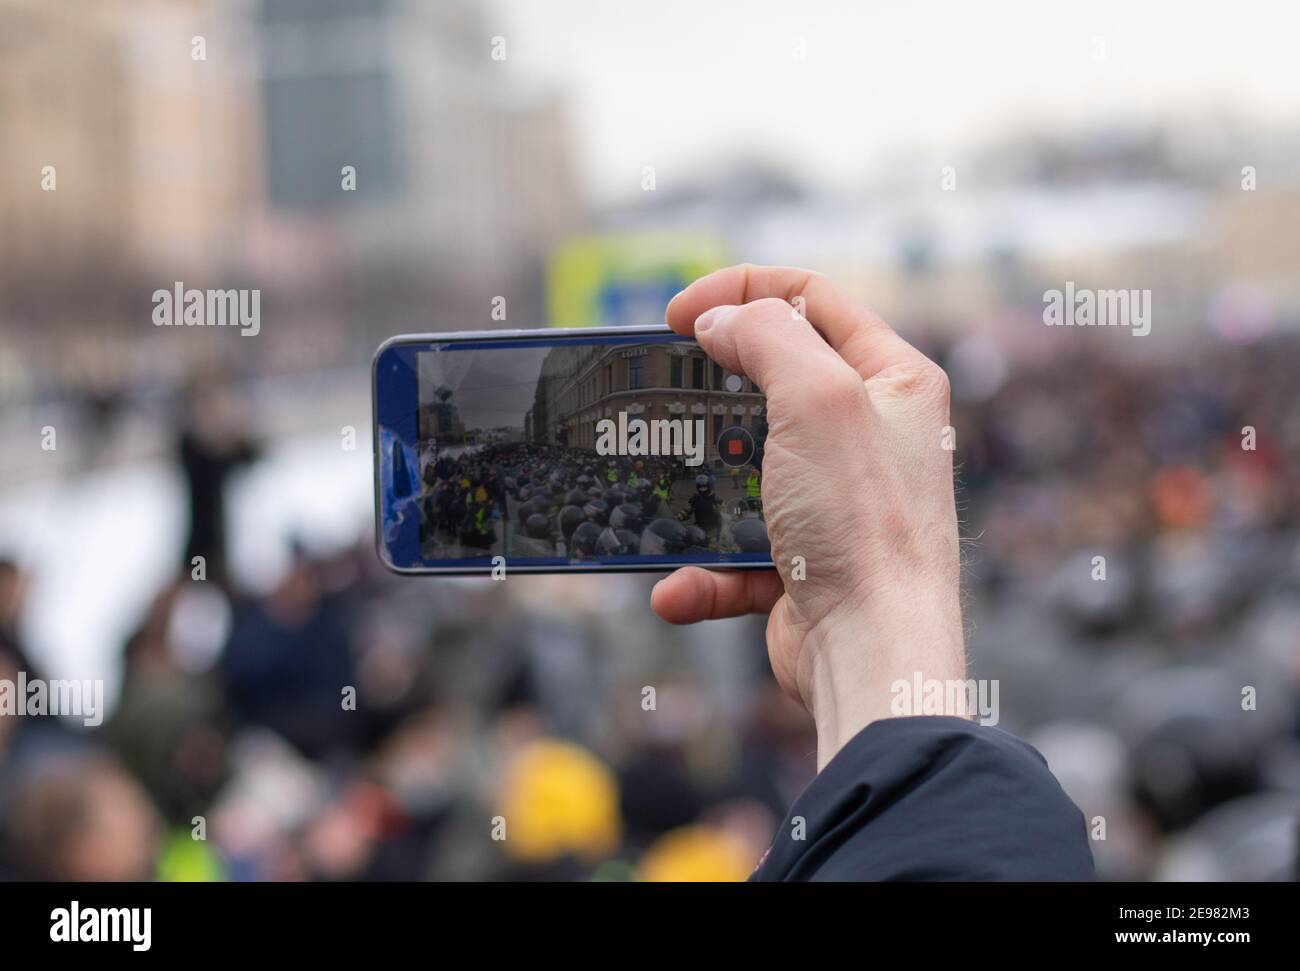 Hand with phone filming video. Police and protest demonstration on screen. Display with crowd of people, blurry background with copy space Stock Photo